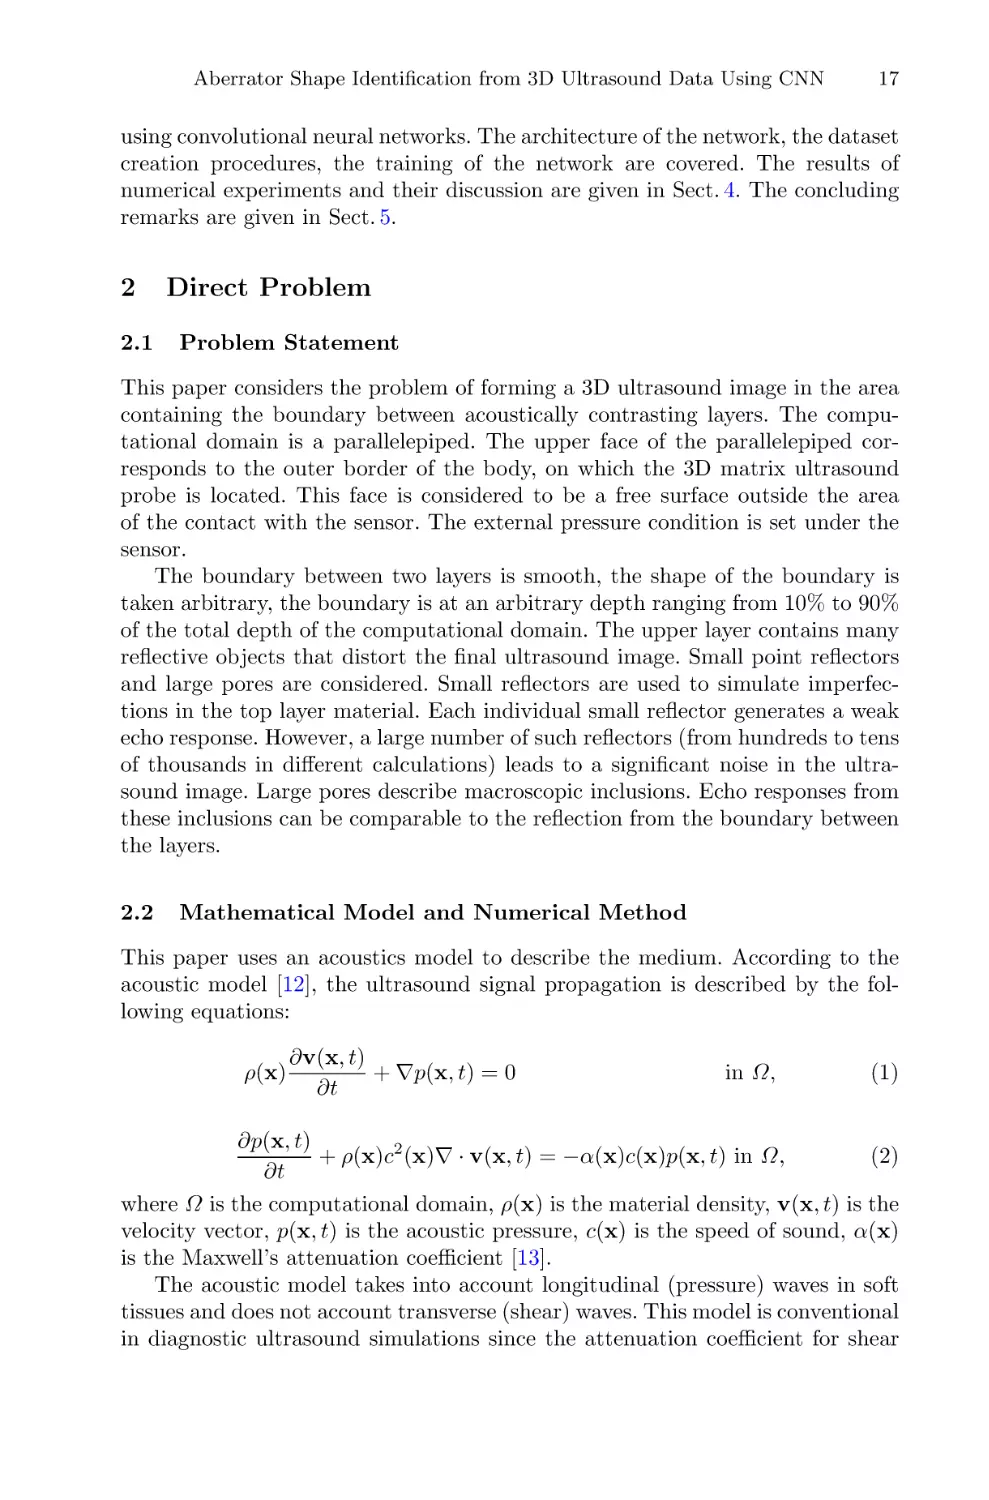 2 Direct Problem
2.1 Problem Statement
2.2 Mathematical Model and Numerical Method